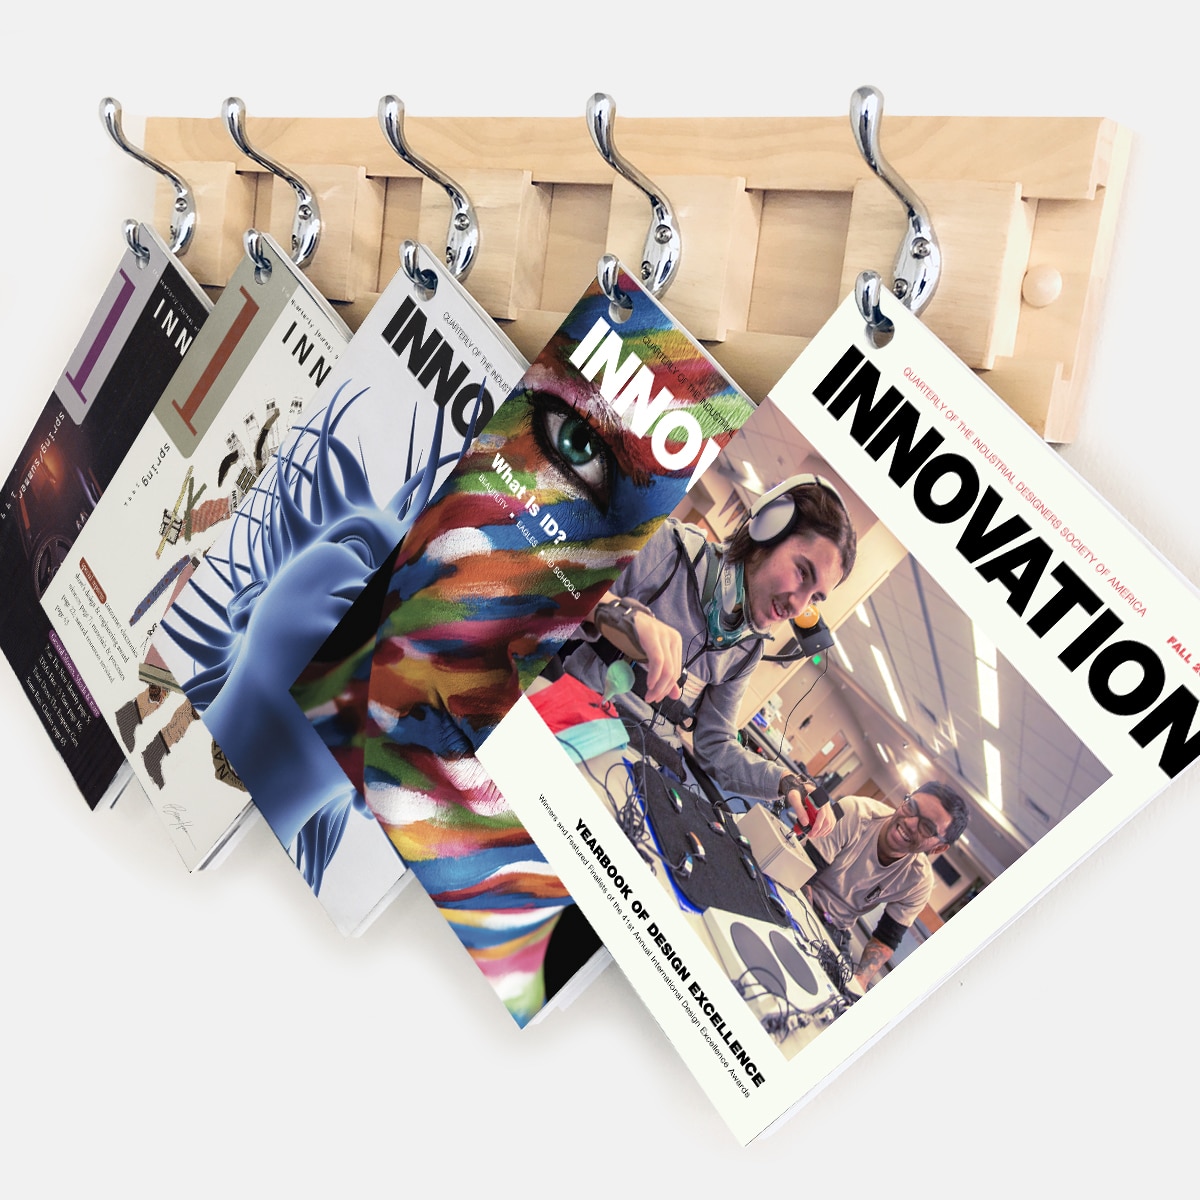 A collection of INNOVATION magazines hangs on a rack